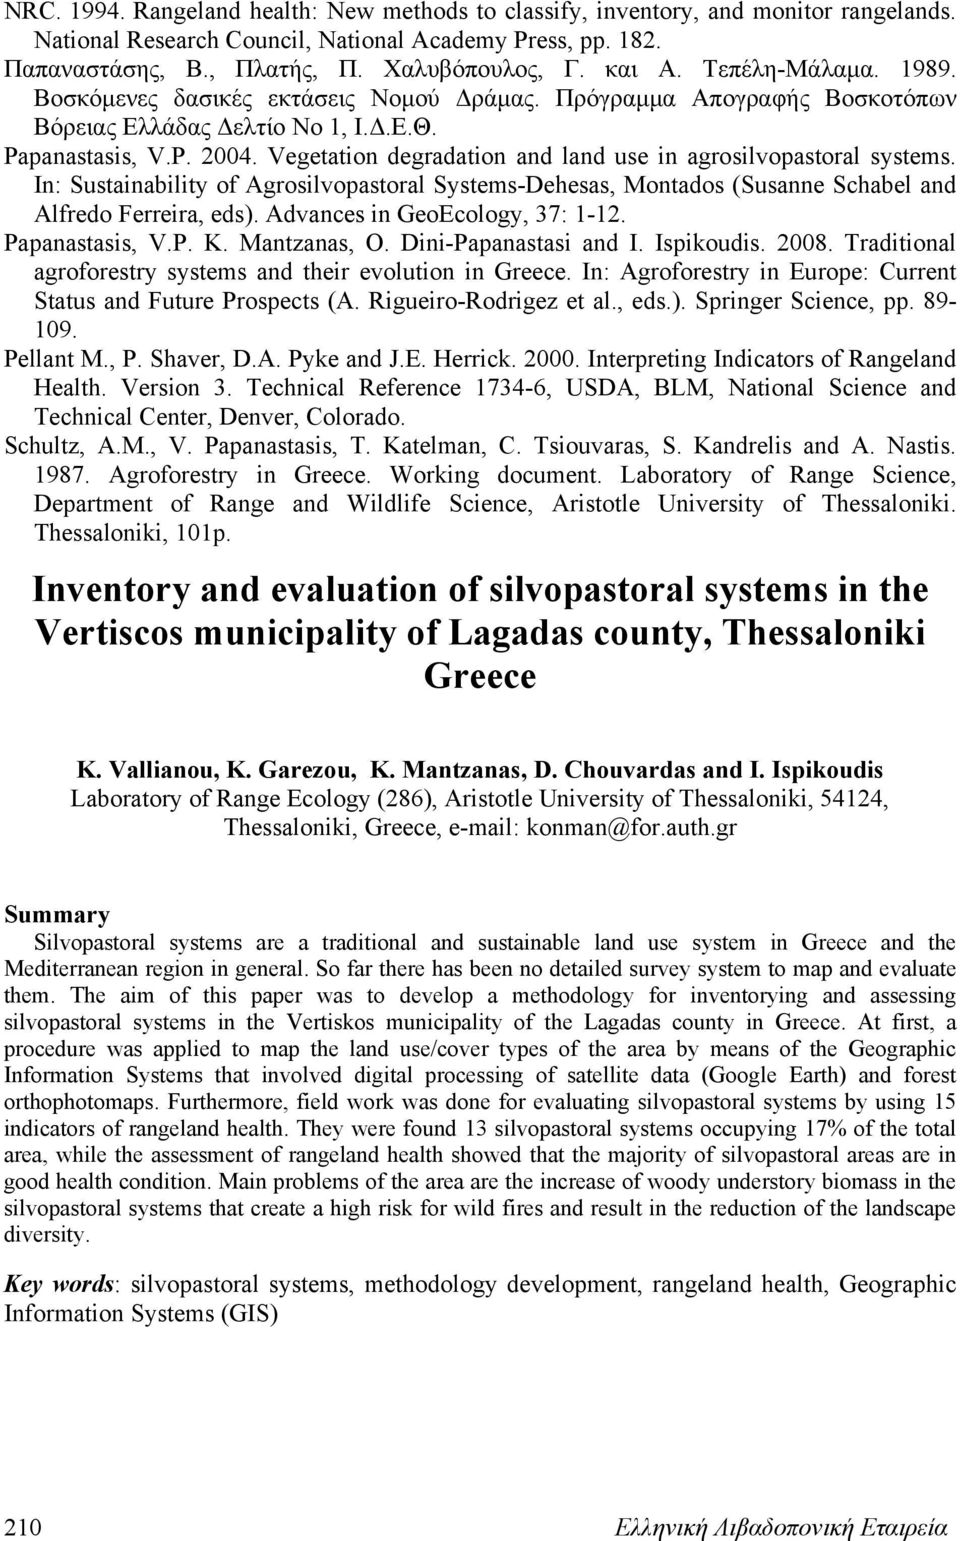 Vegetation degradation and land use in agrosilvopastoral systems. In: Sustainability of Agrosilvopastoral Systems-Dehesas, Montados (Susanne Schabel and Alfredo Ferreira, eds).